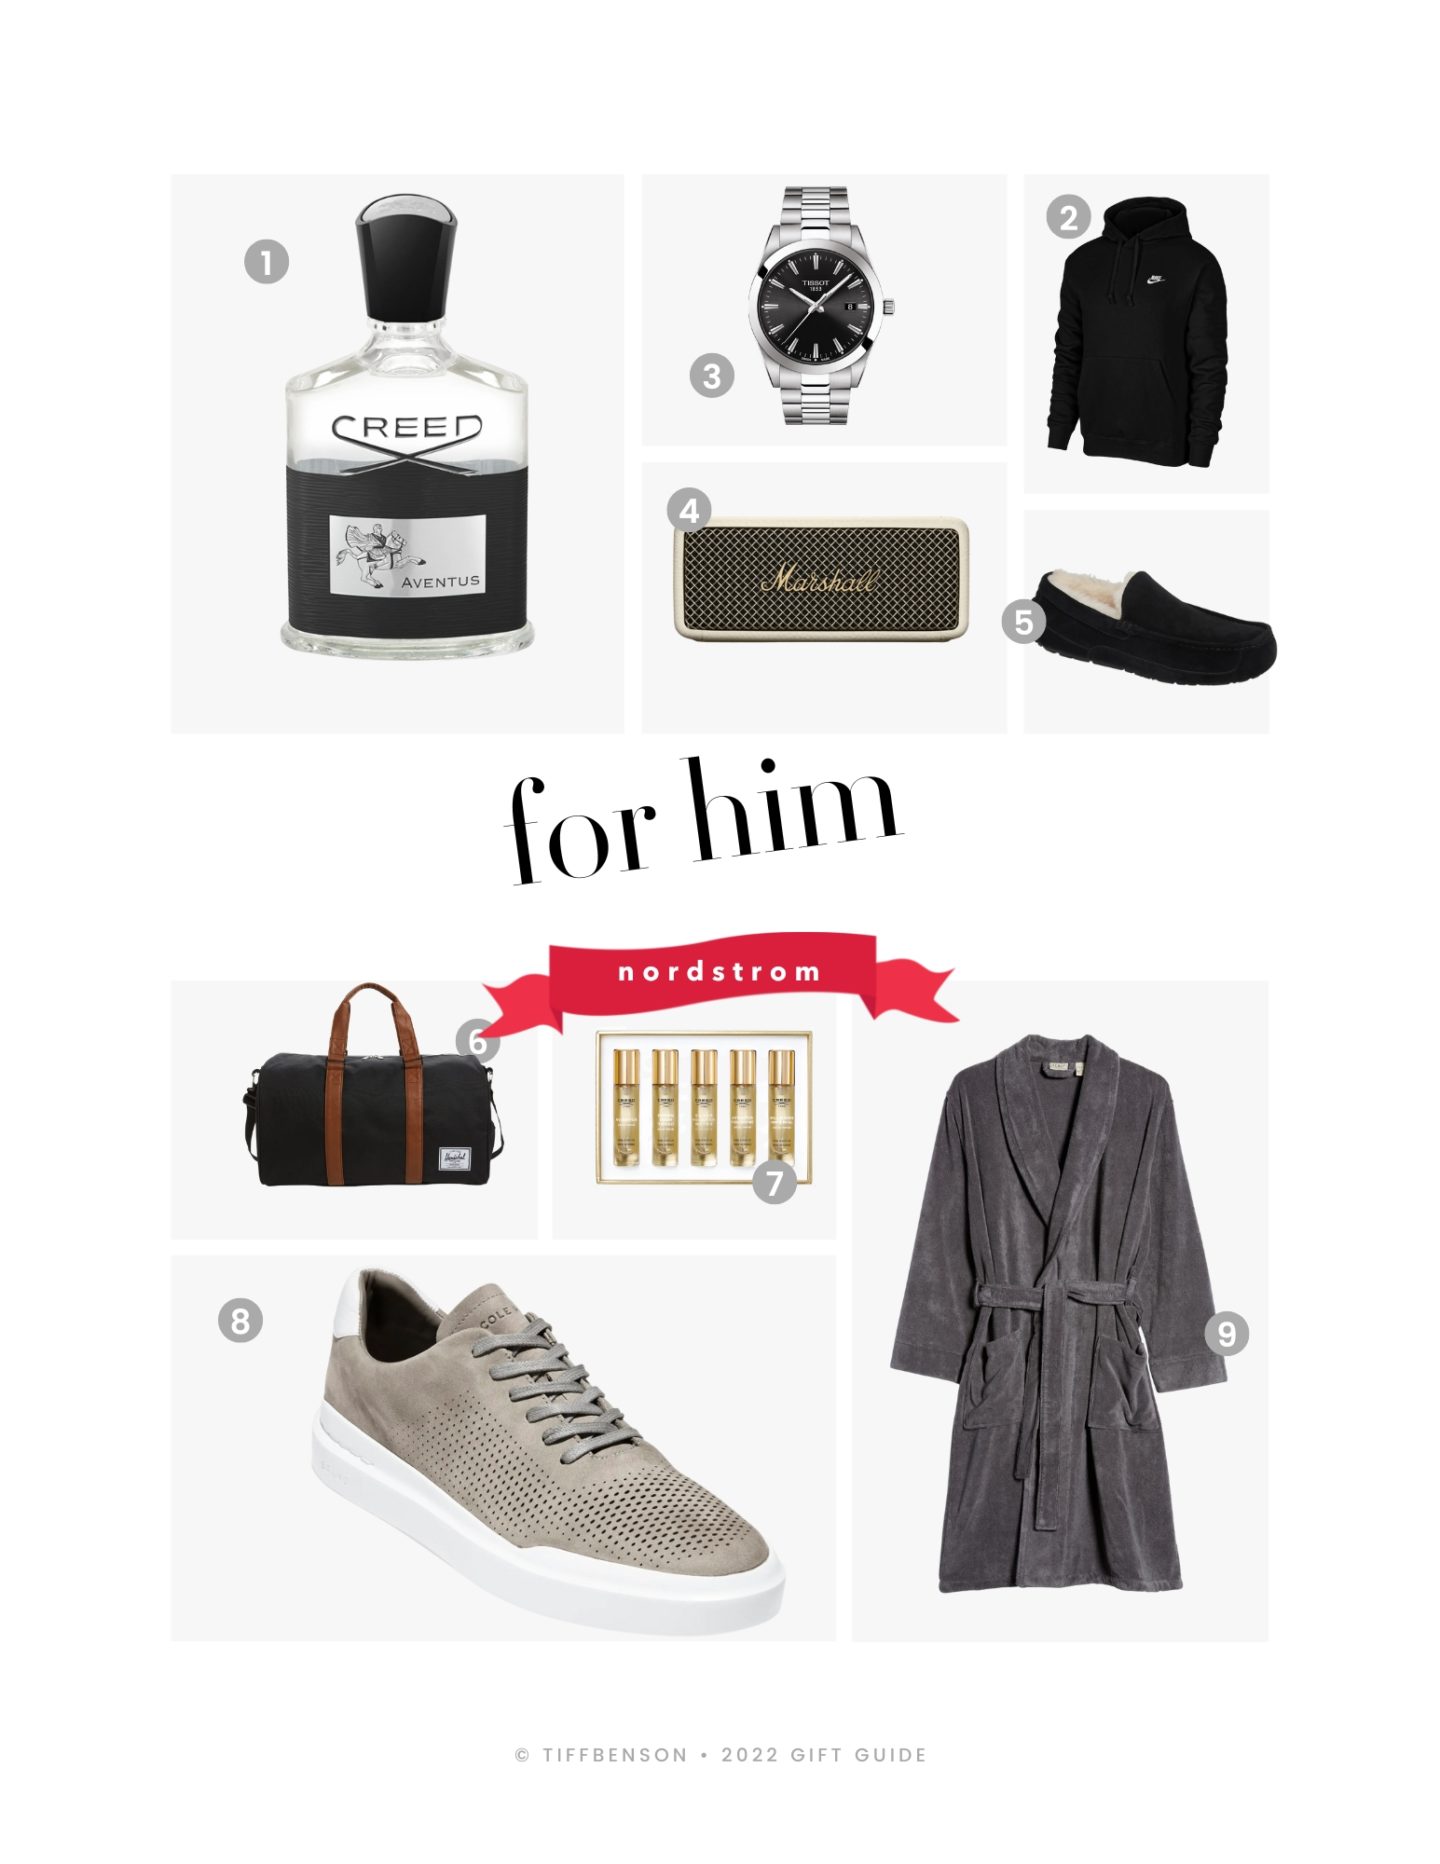 Gift guides for him at Nordstrom